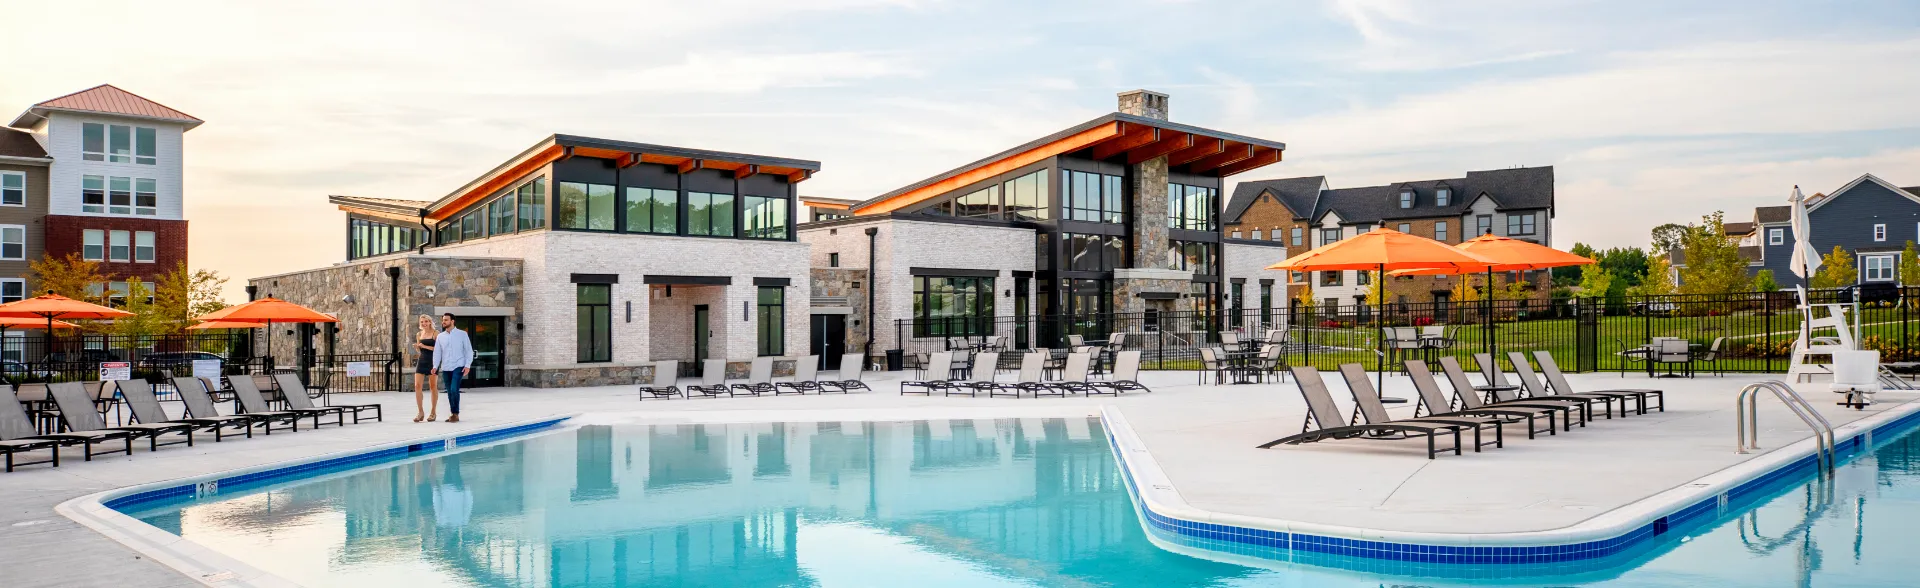 Pool and clubhouse at Greenleigh, a new community in Baltimore